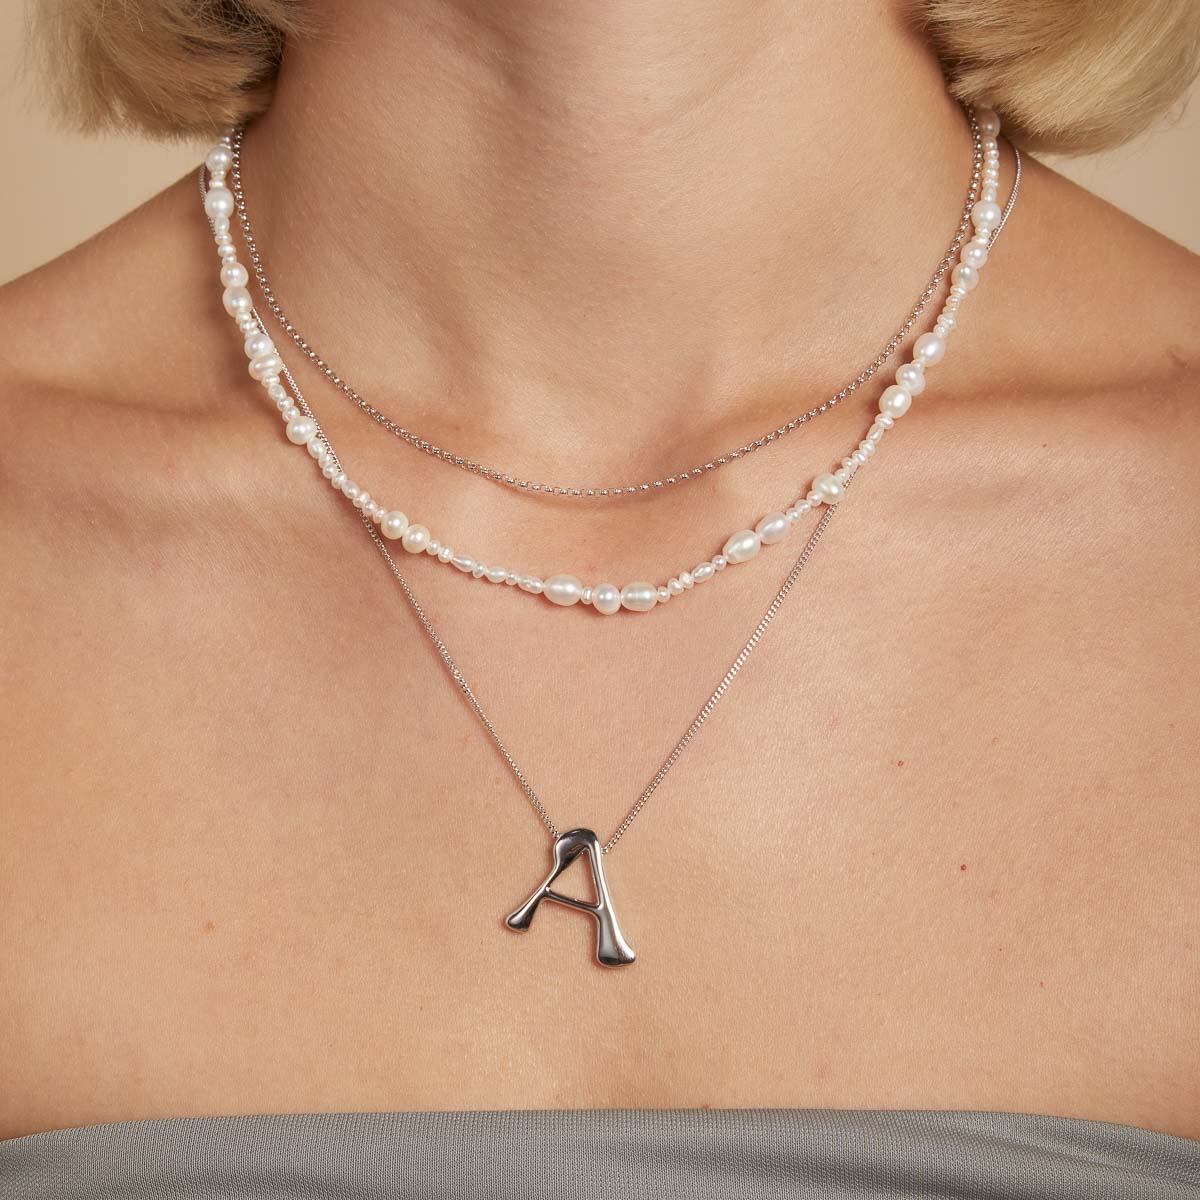 A Initial Bold Pendant Necklace in Silver